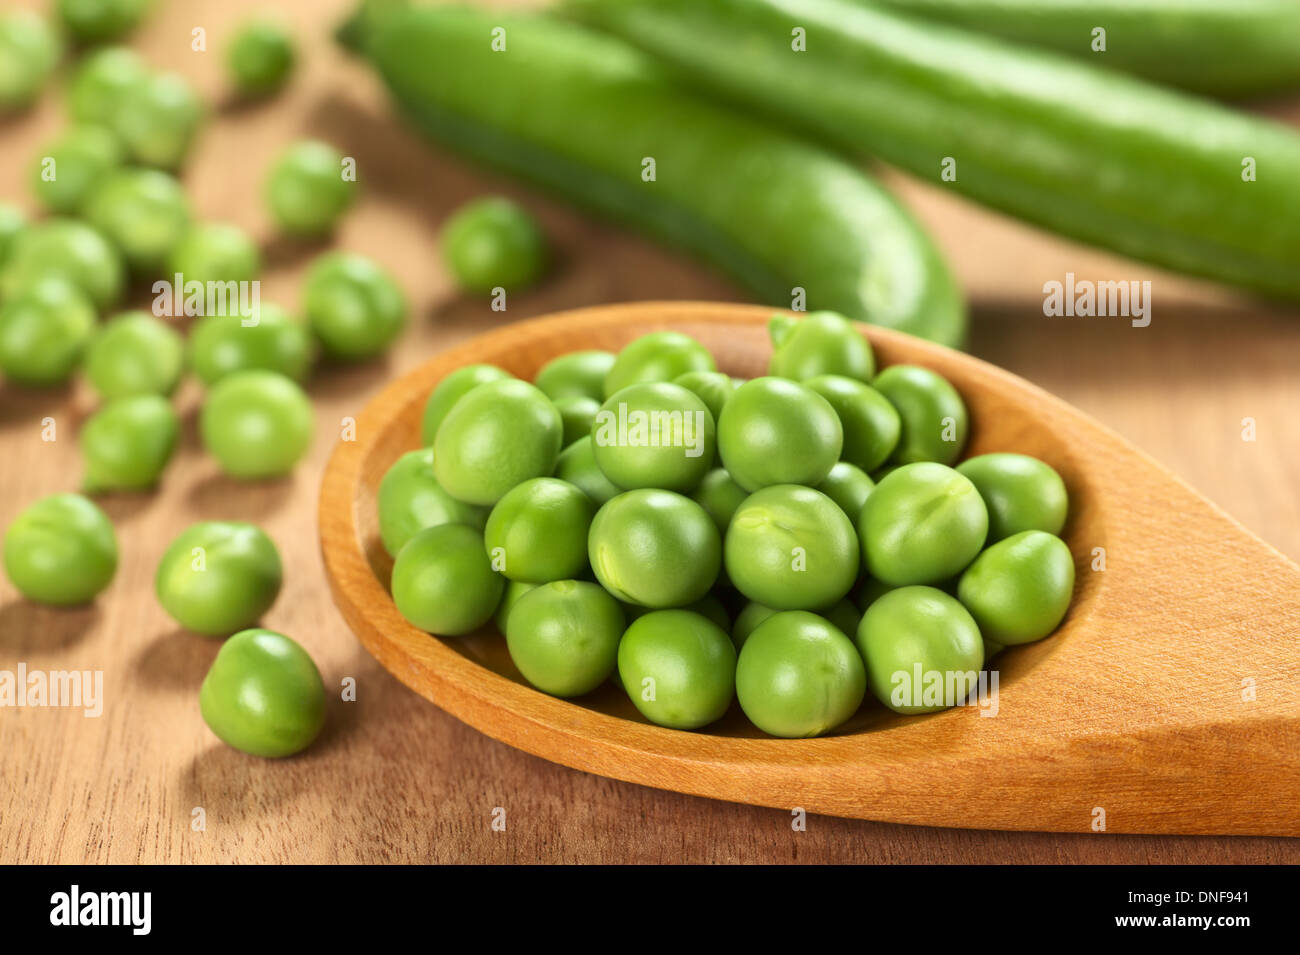 Fresh raw green pea (lat. Pisum Sativum) seeds on wooden spoon (Selective Focus, Focus on the peas in the two lower rows) Stock Photo